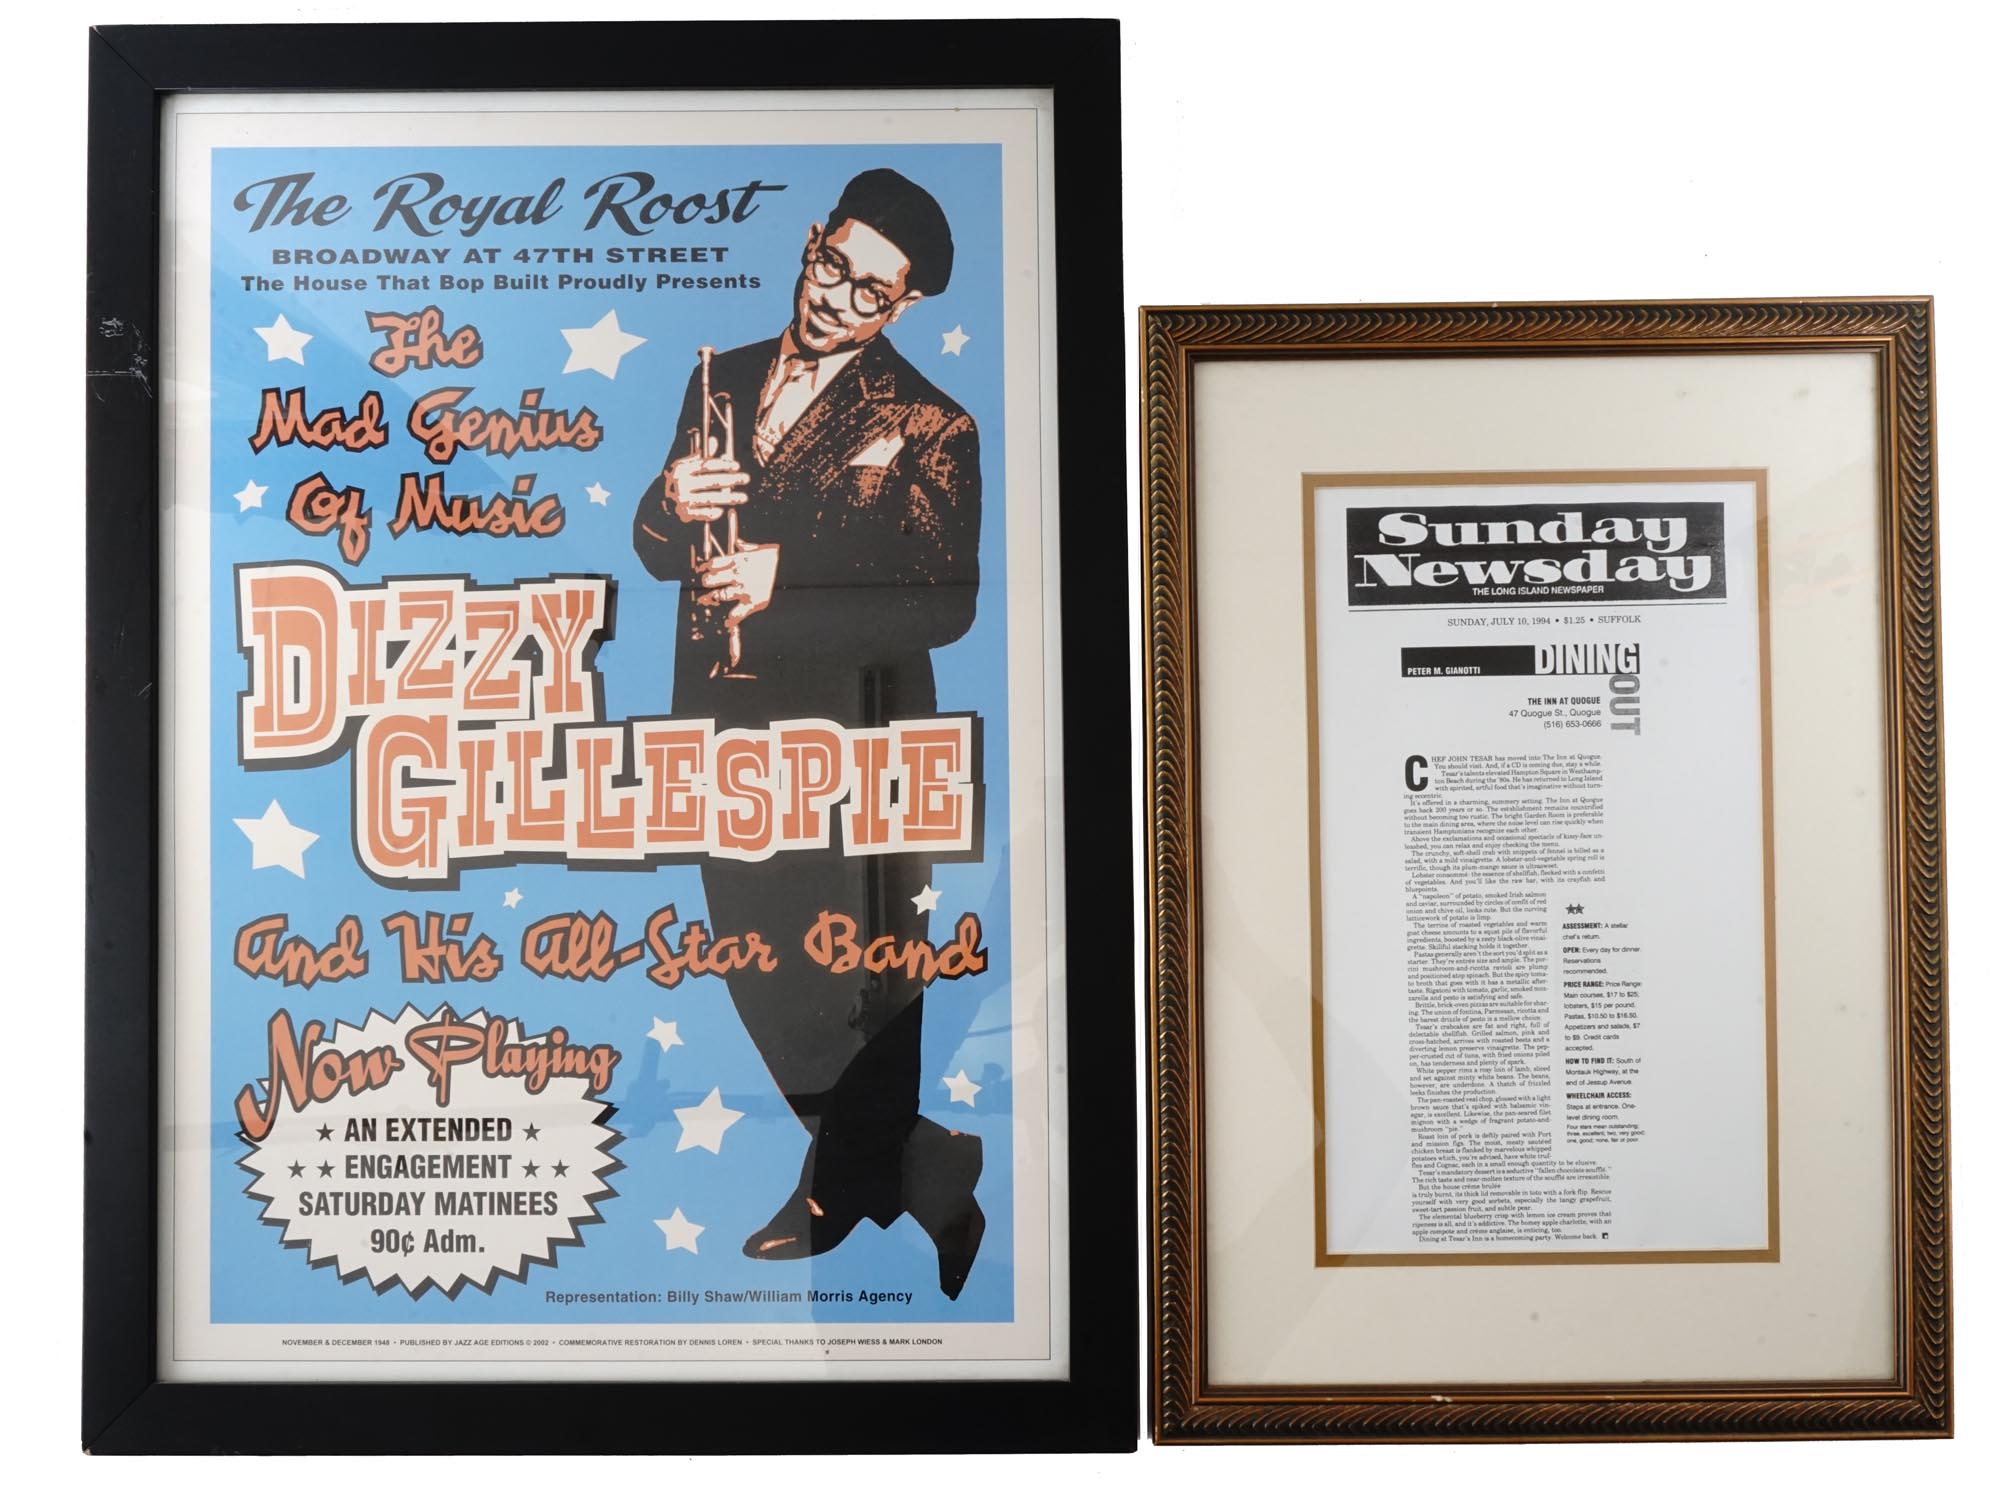 DIZZY GILLESPIE POSTER AND SUNDAY NEWSDAY CUT OUT PIC-0